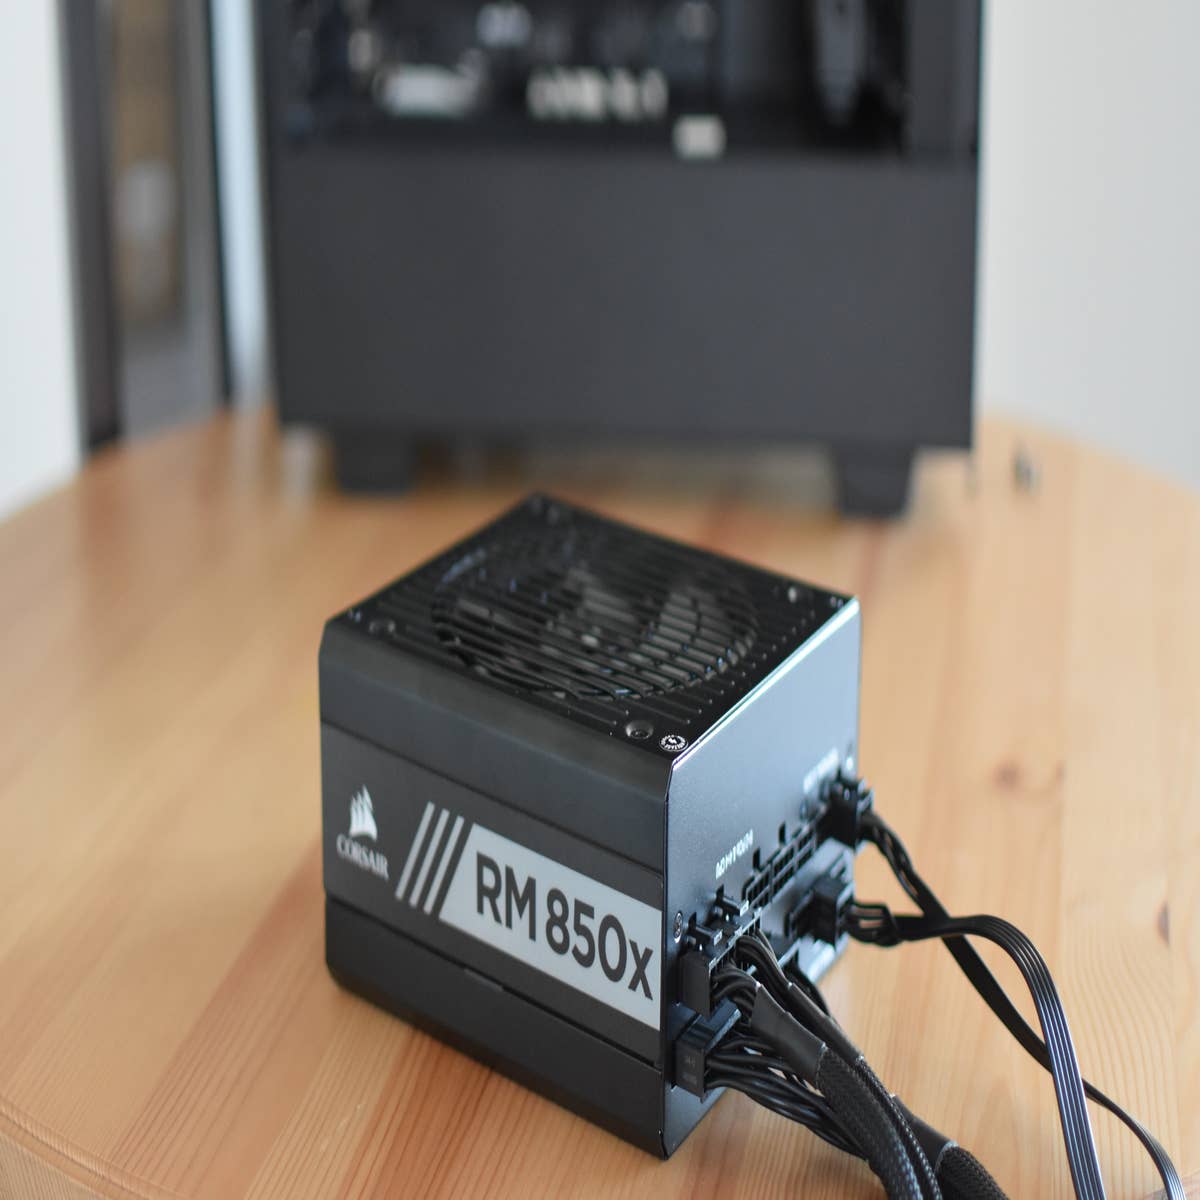 How to install a PSU